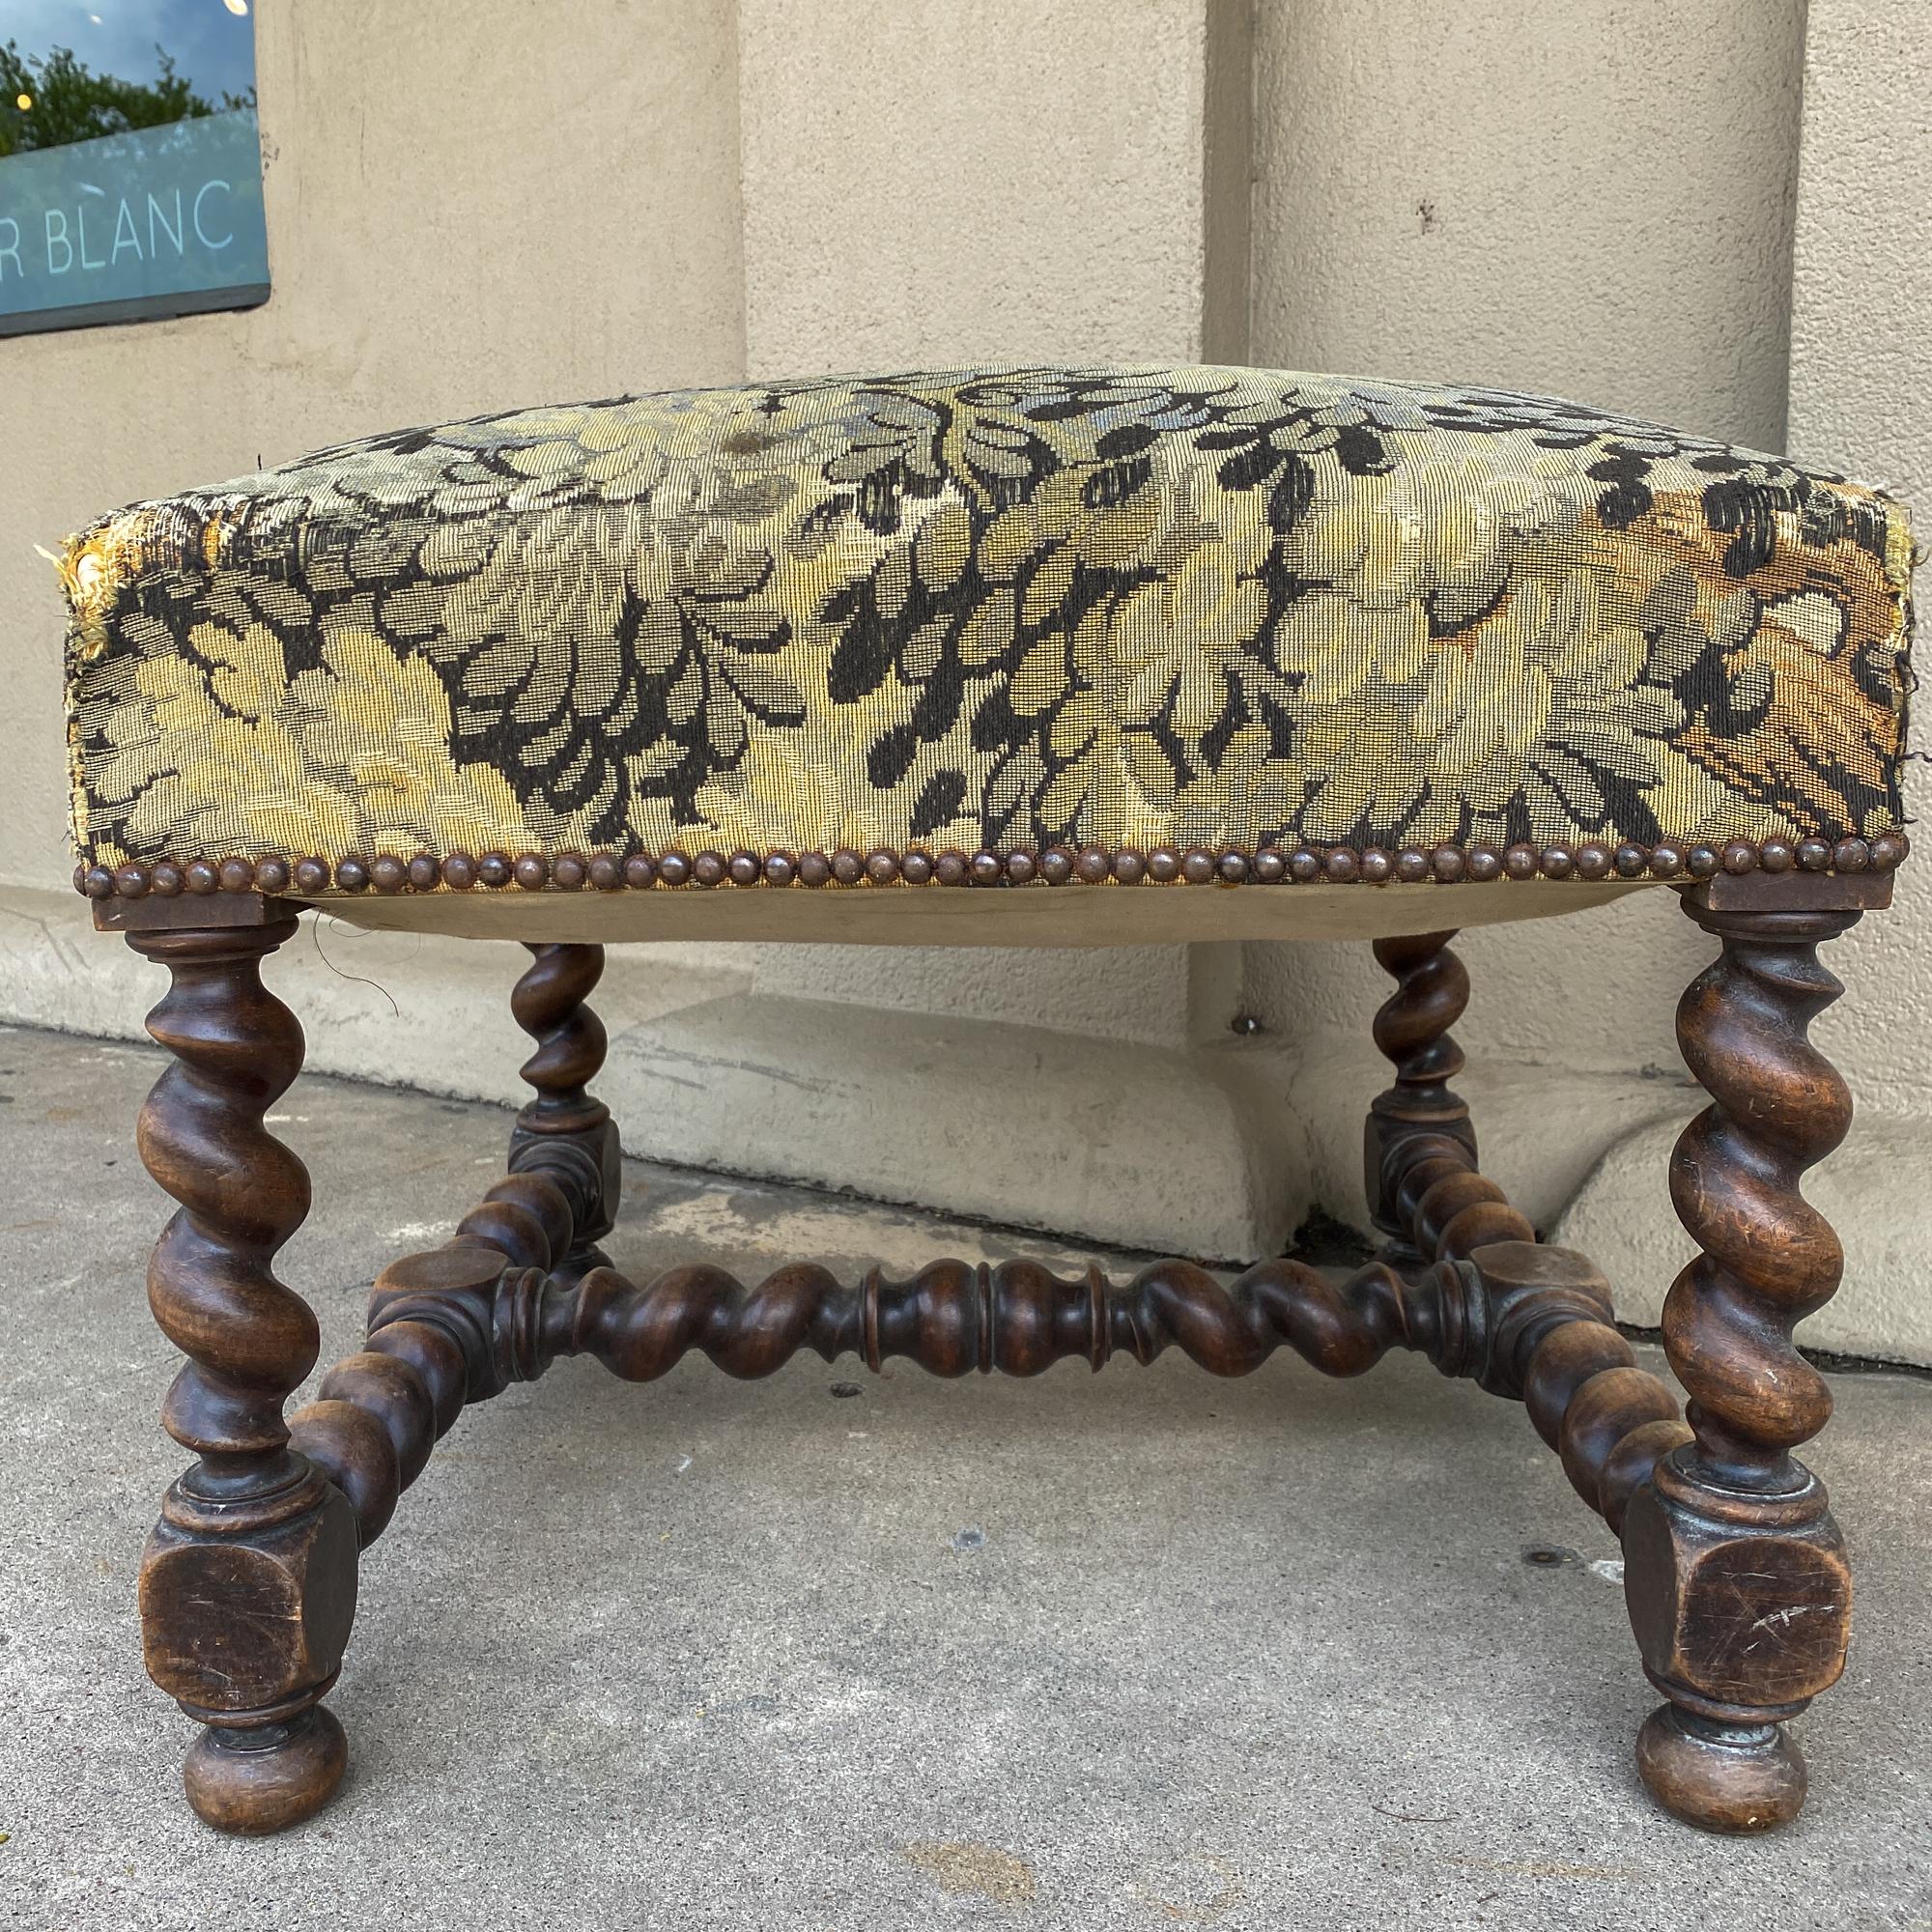 Antique French Barley Twist Ottoman with Embroidered Upholstery, circa 1900 3